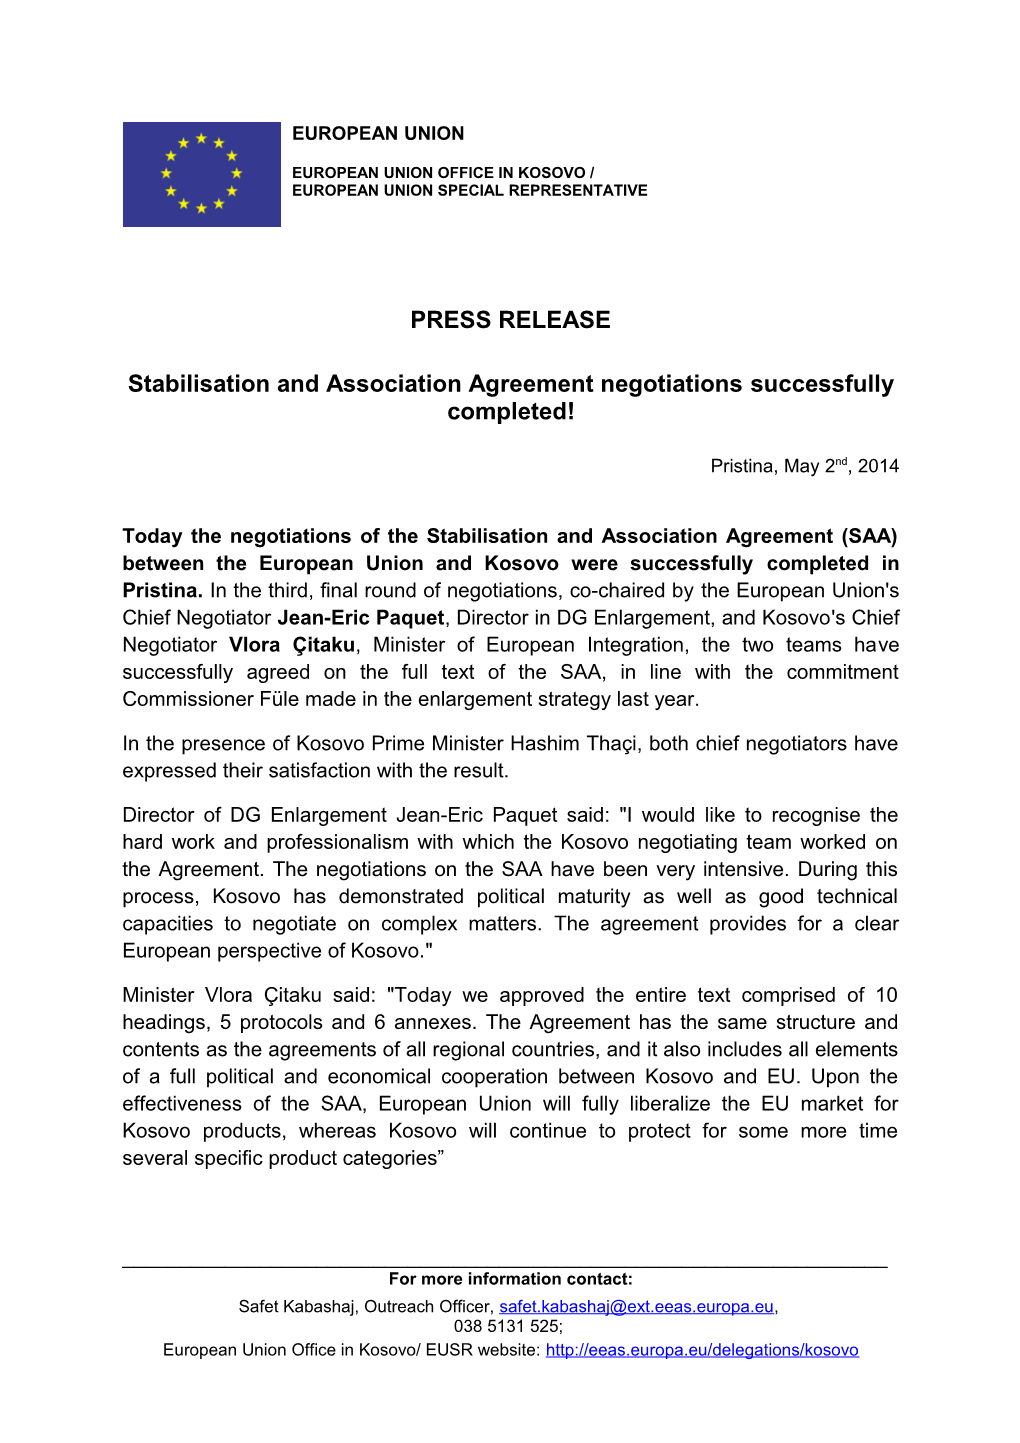 Stabilisation and Association Agreement Negotiationssuccessfully Completed!